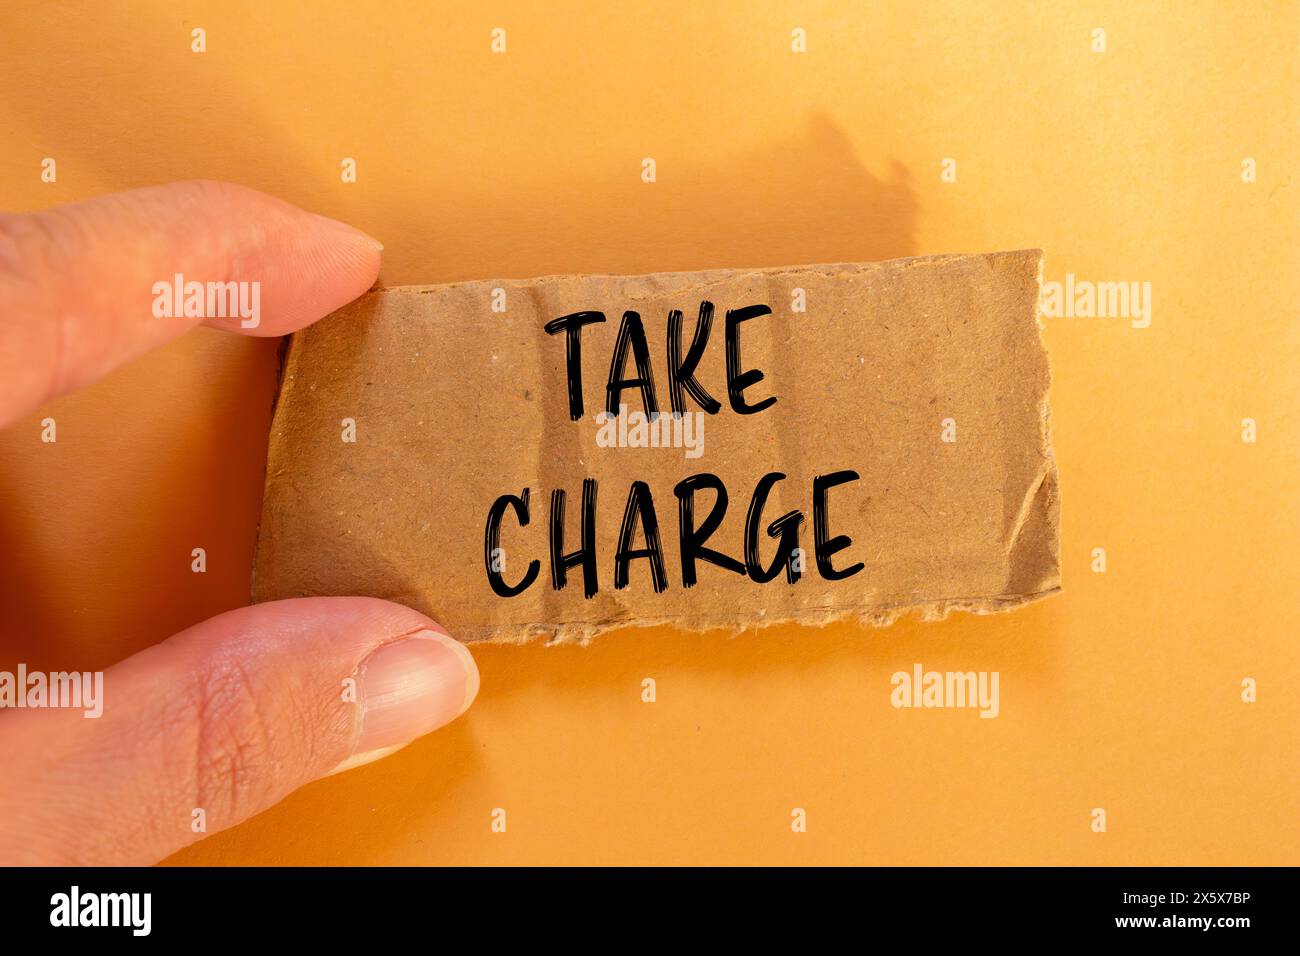 Take charge words written on ripped cardbaord paper with orange background. Conceptual take charge symbol. Copy space. Stock Photo